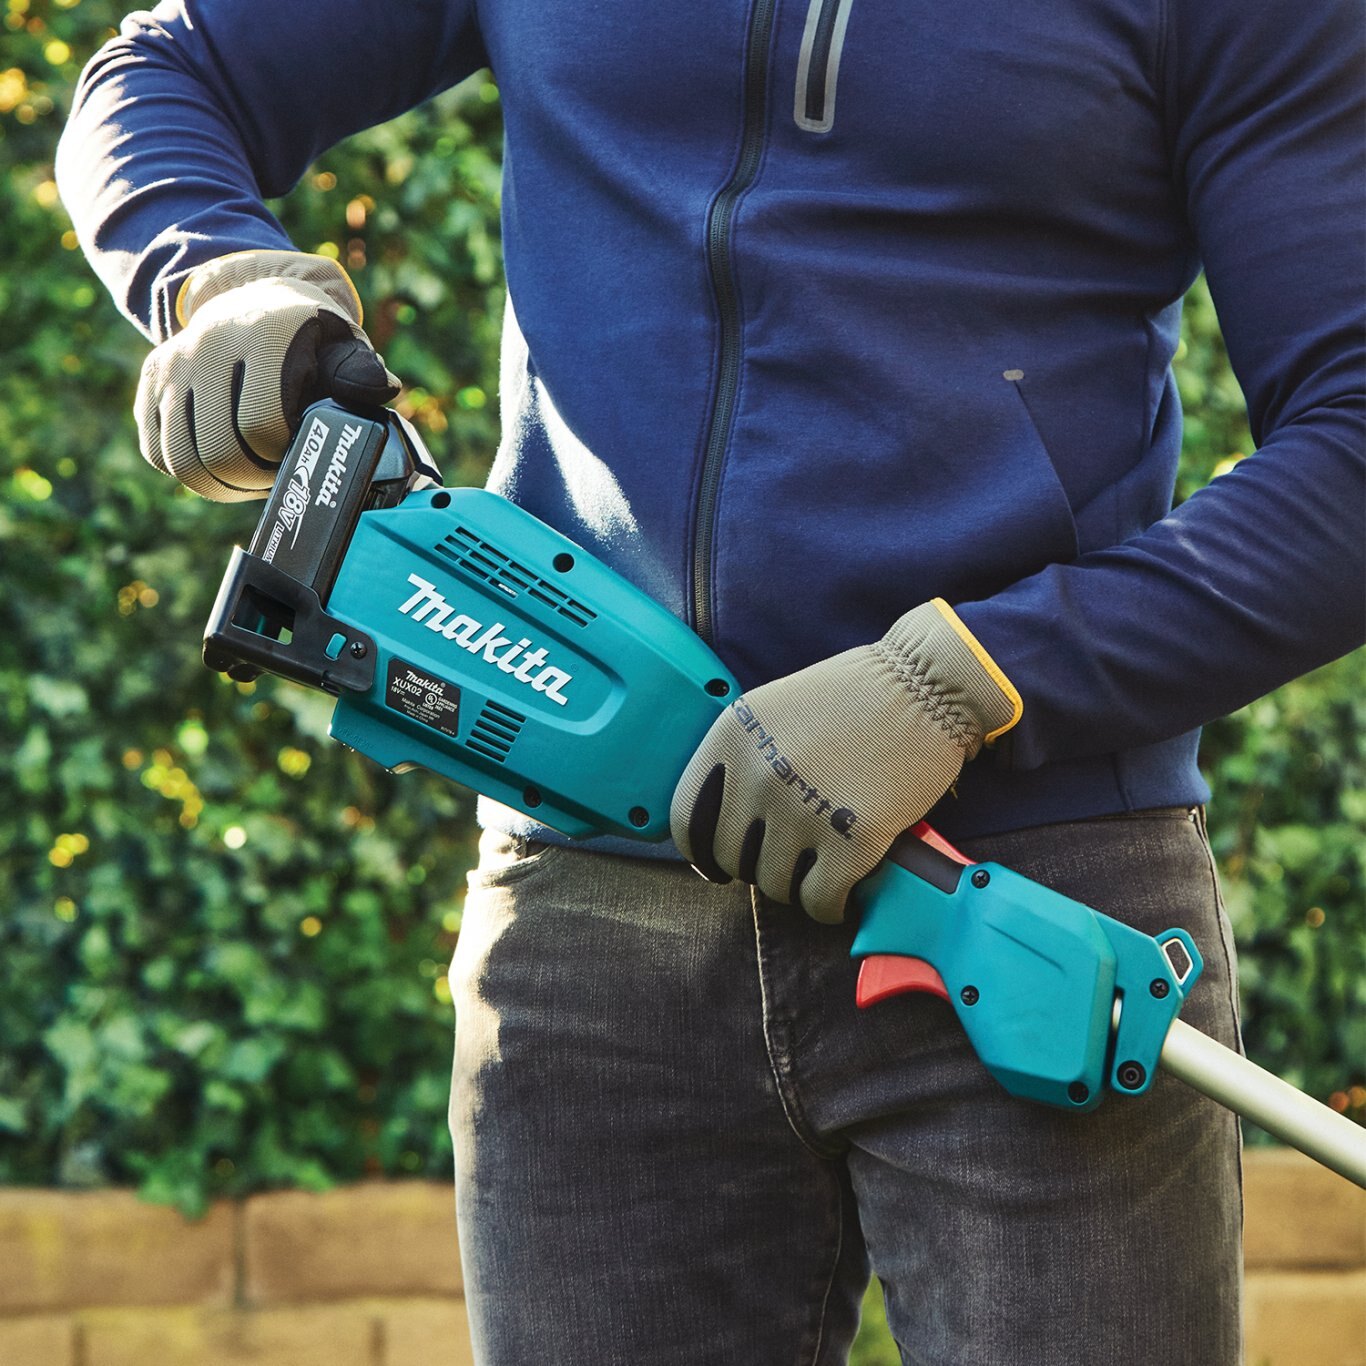 Makita 18V LXT® Lithium?Ion Brushless Cordless Couple Shaft Power Head Kit w/ 13 String Trimmer & 20 Hedge Trimmer Attachments (4.0Ah)